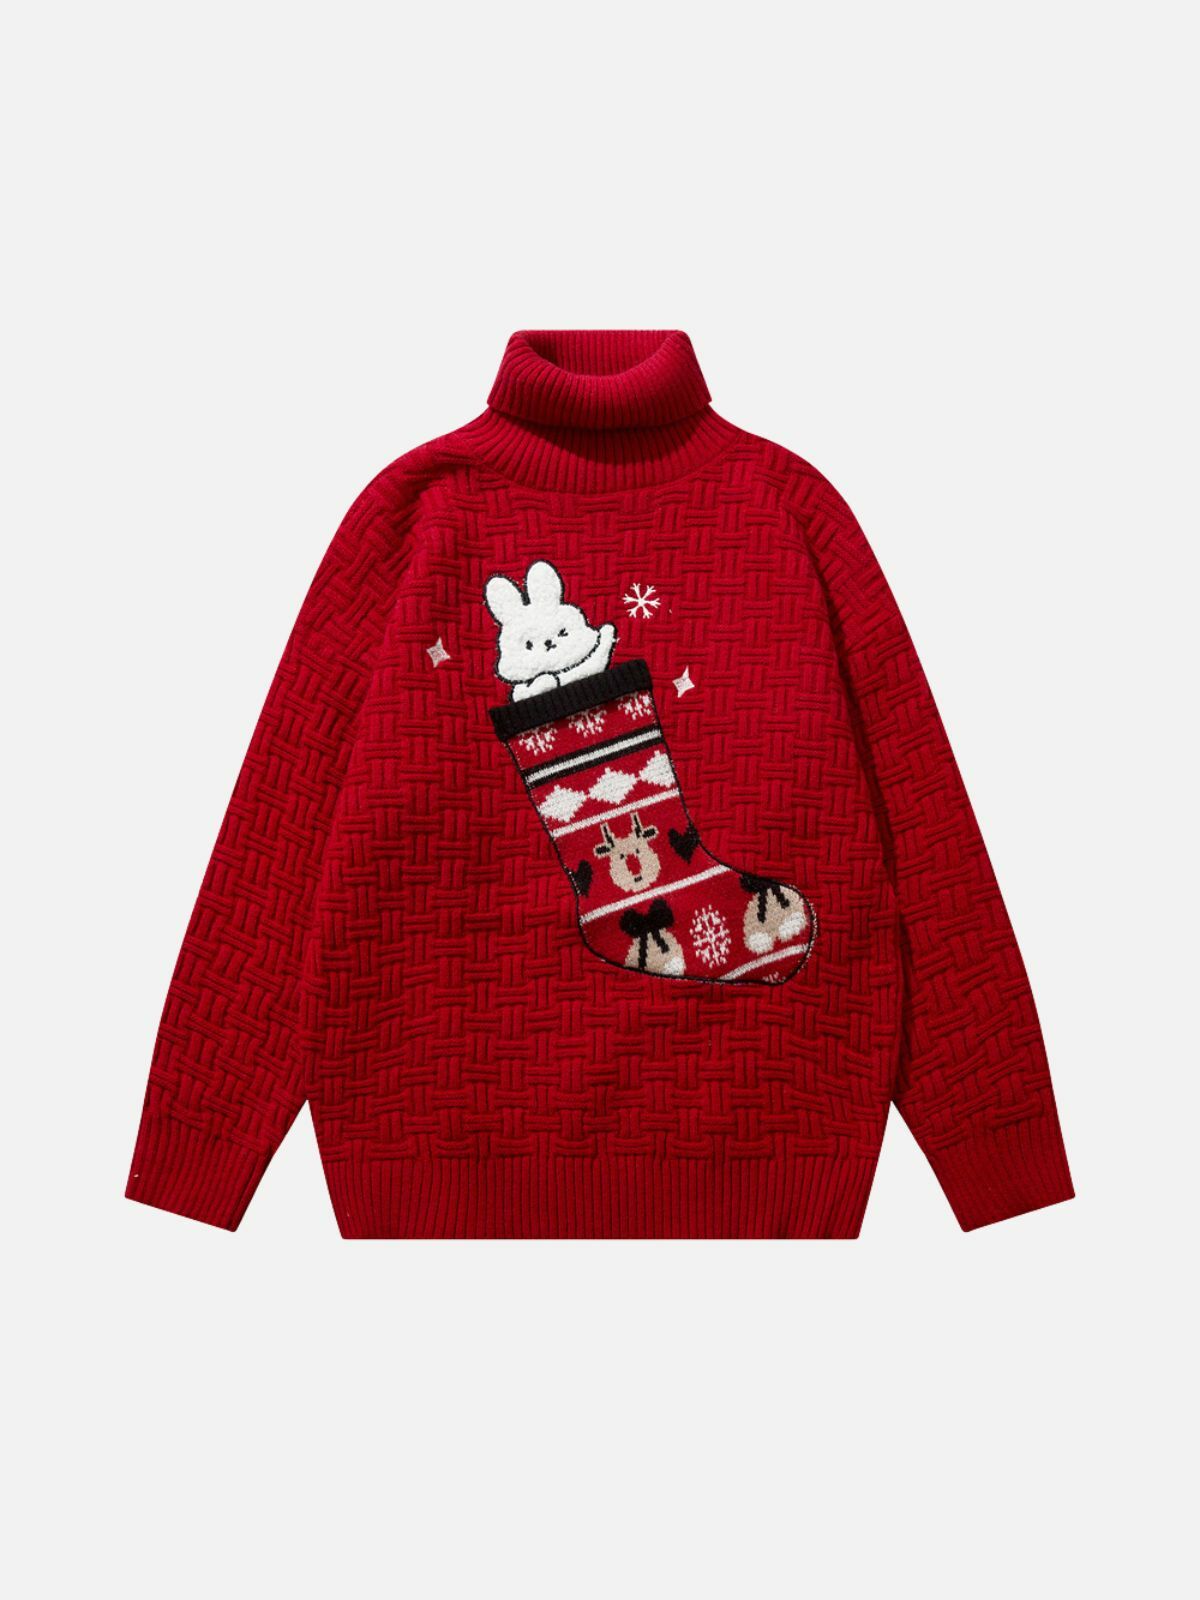 festive rabbit print sweater cozy & quirky christmas style 6964